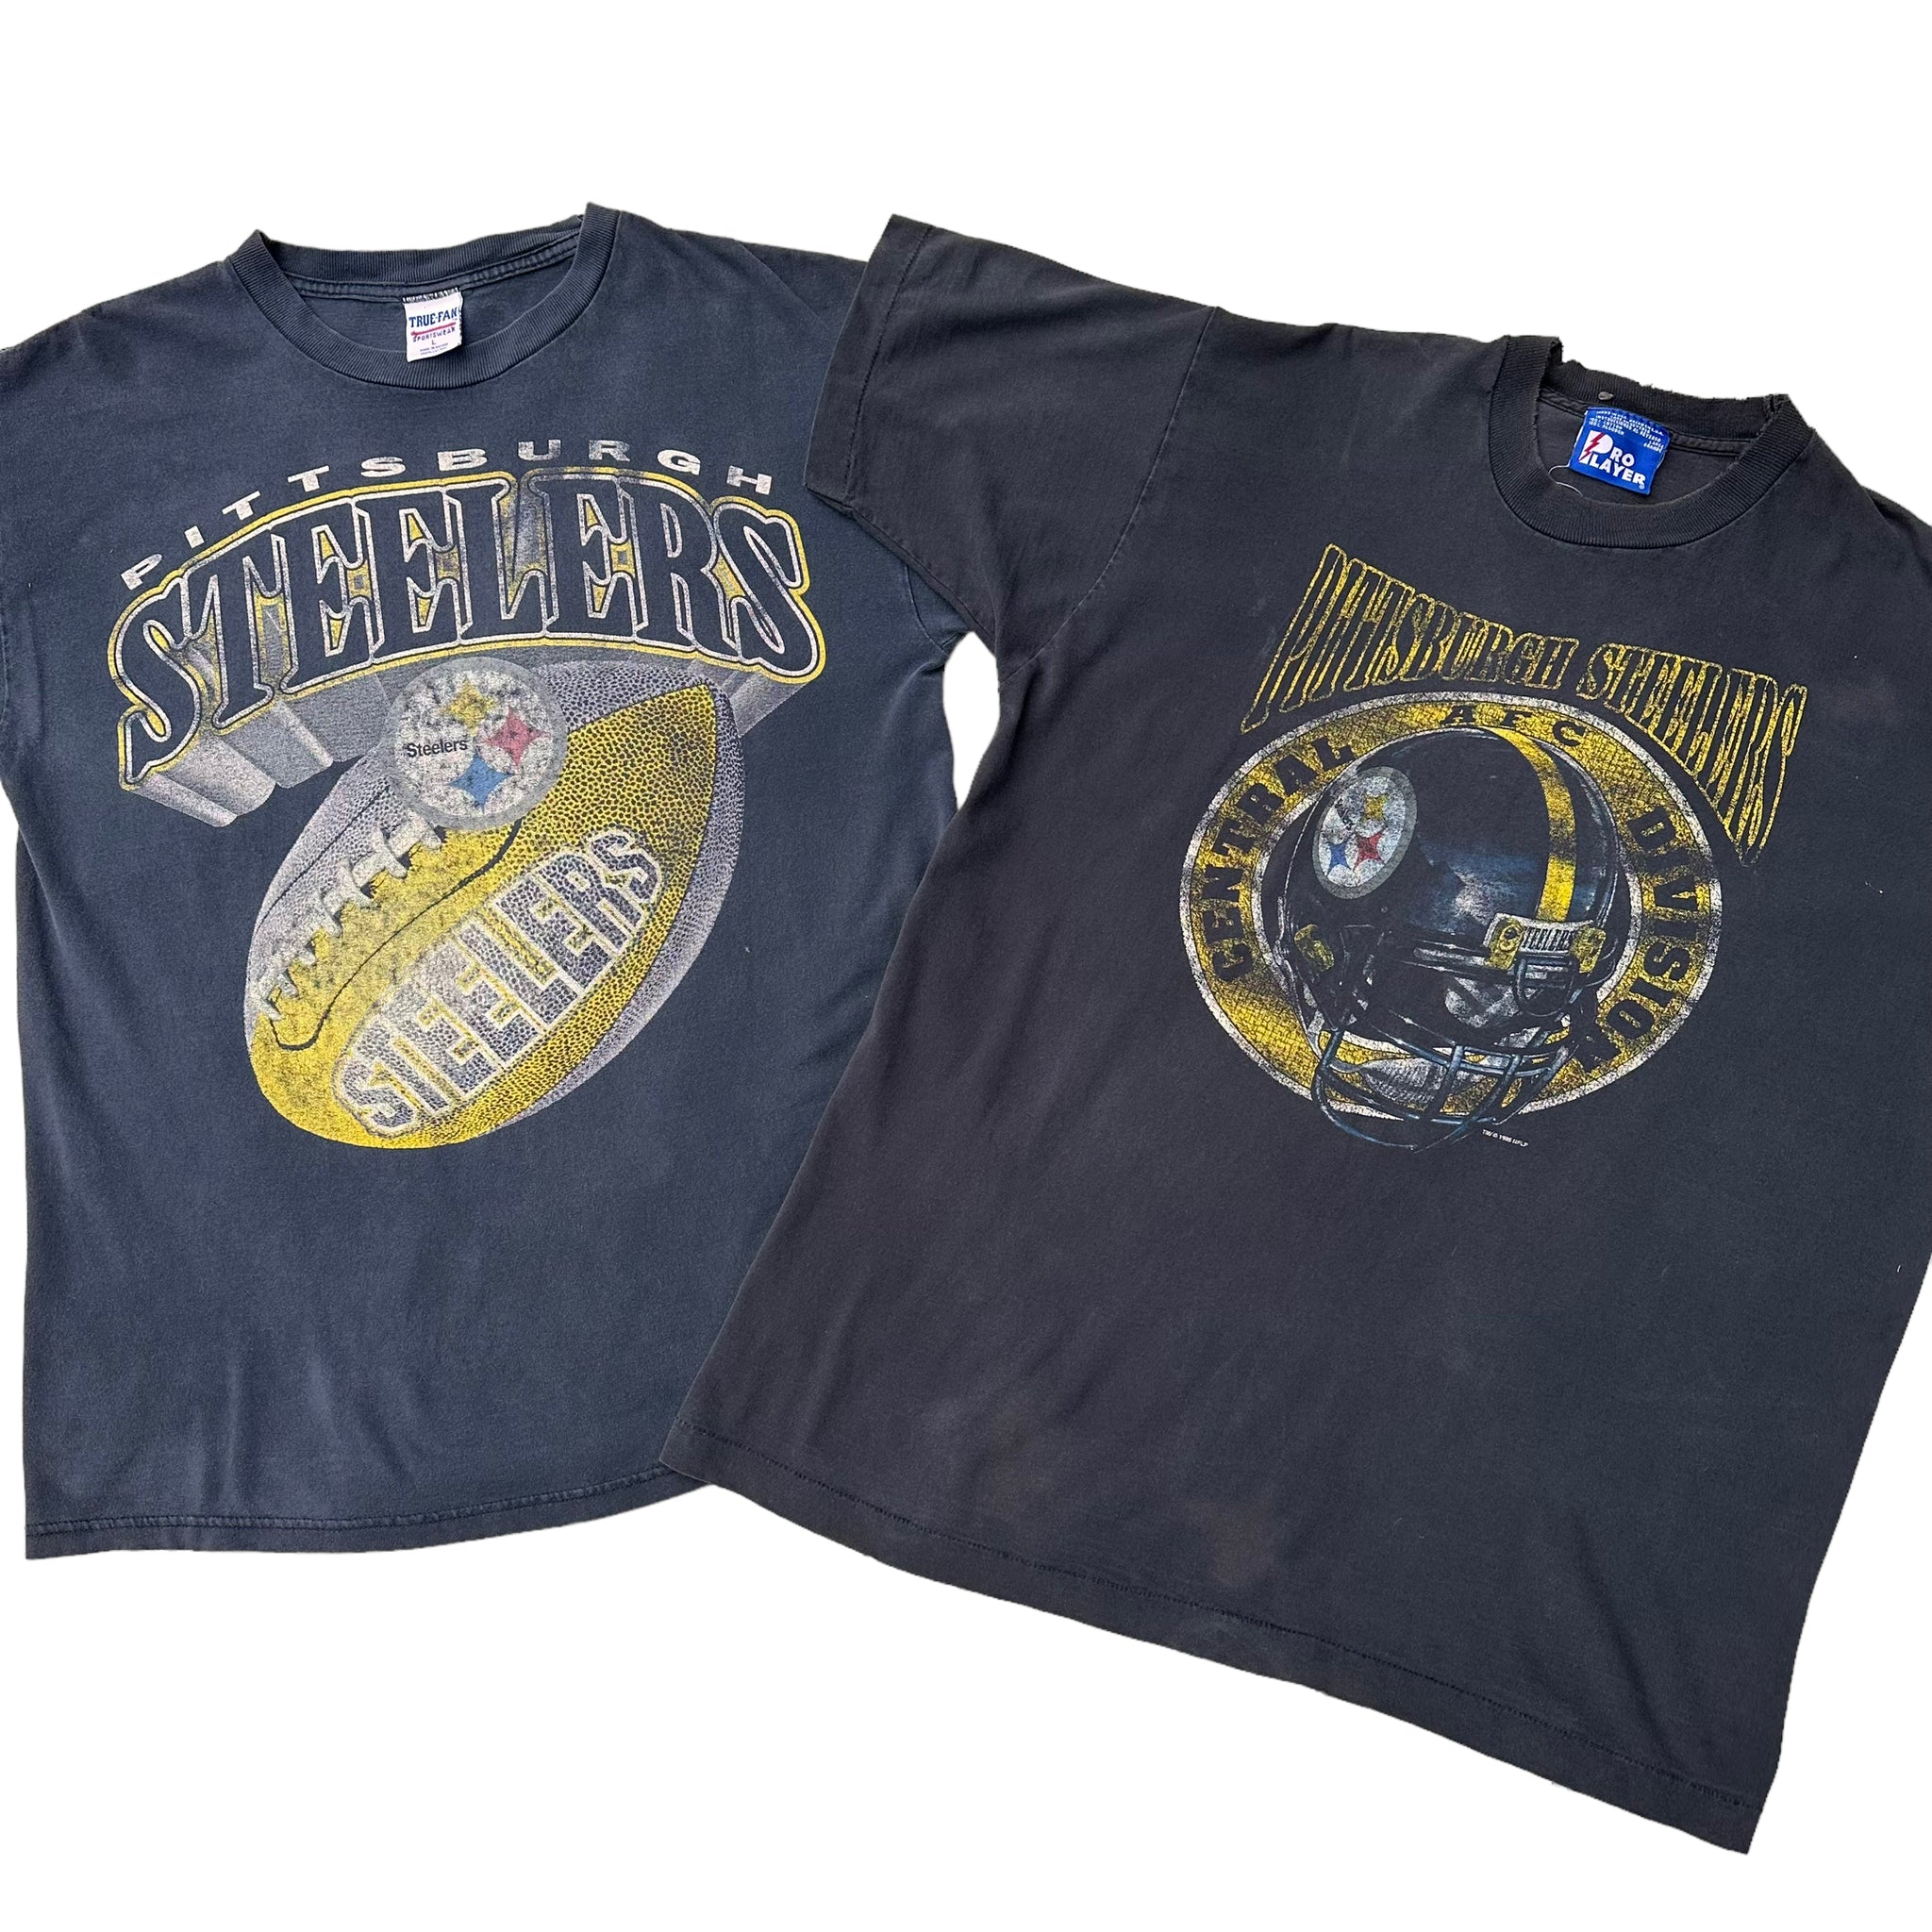 Washed out steelers shirts L/XL